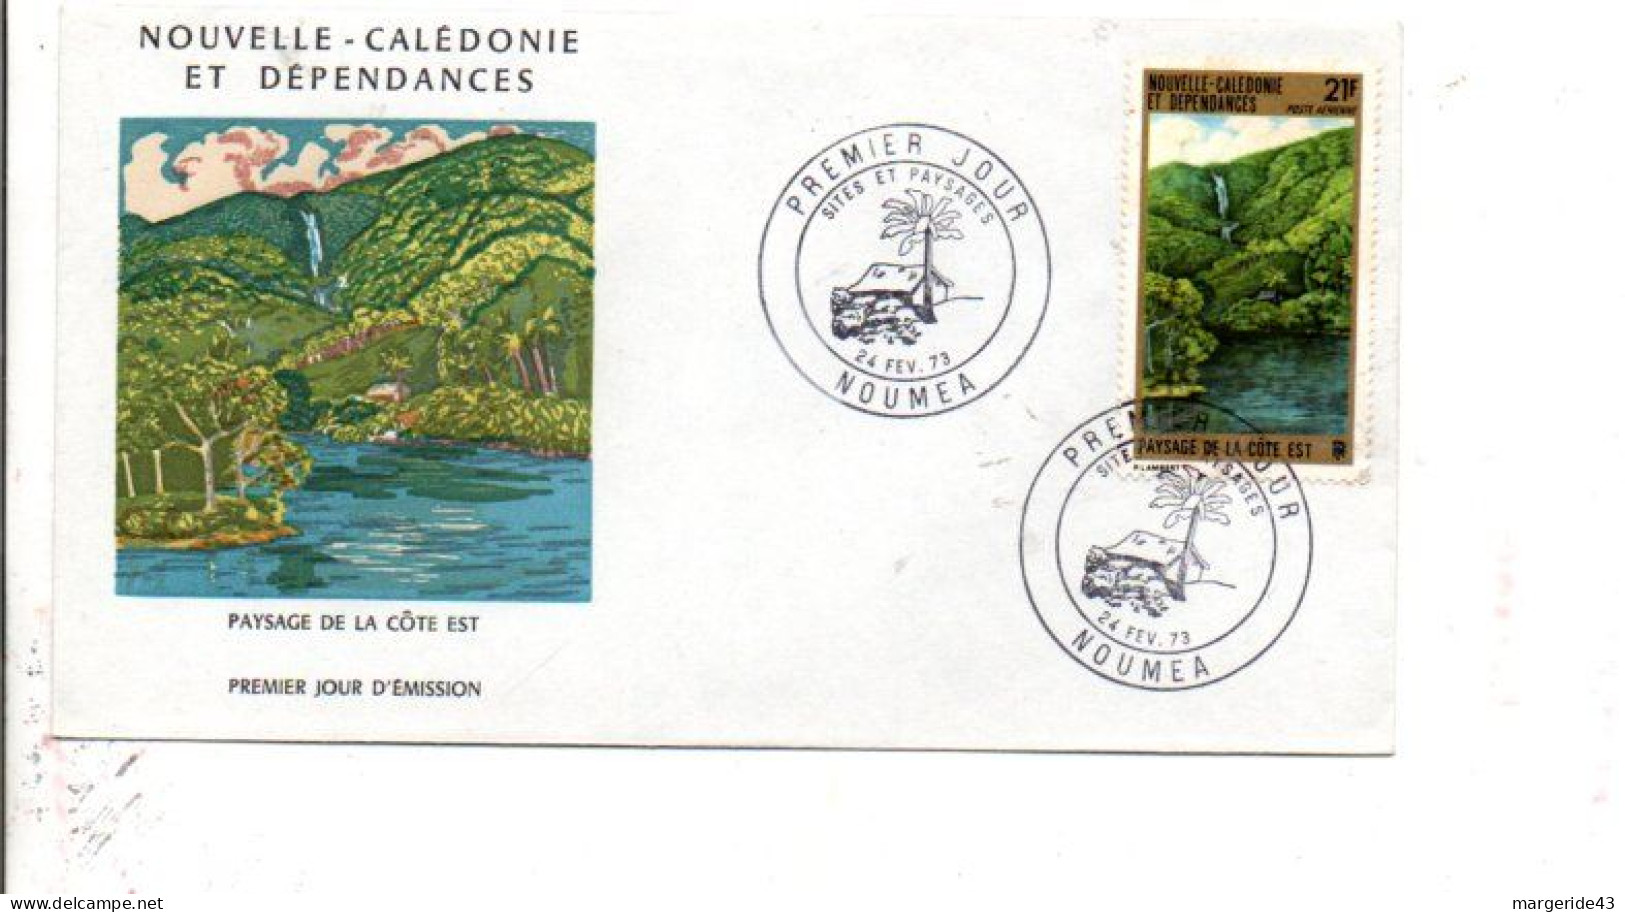 NOUVELLE CALEDONIE FDC 1973 PAYSAGES - FDC